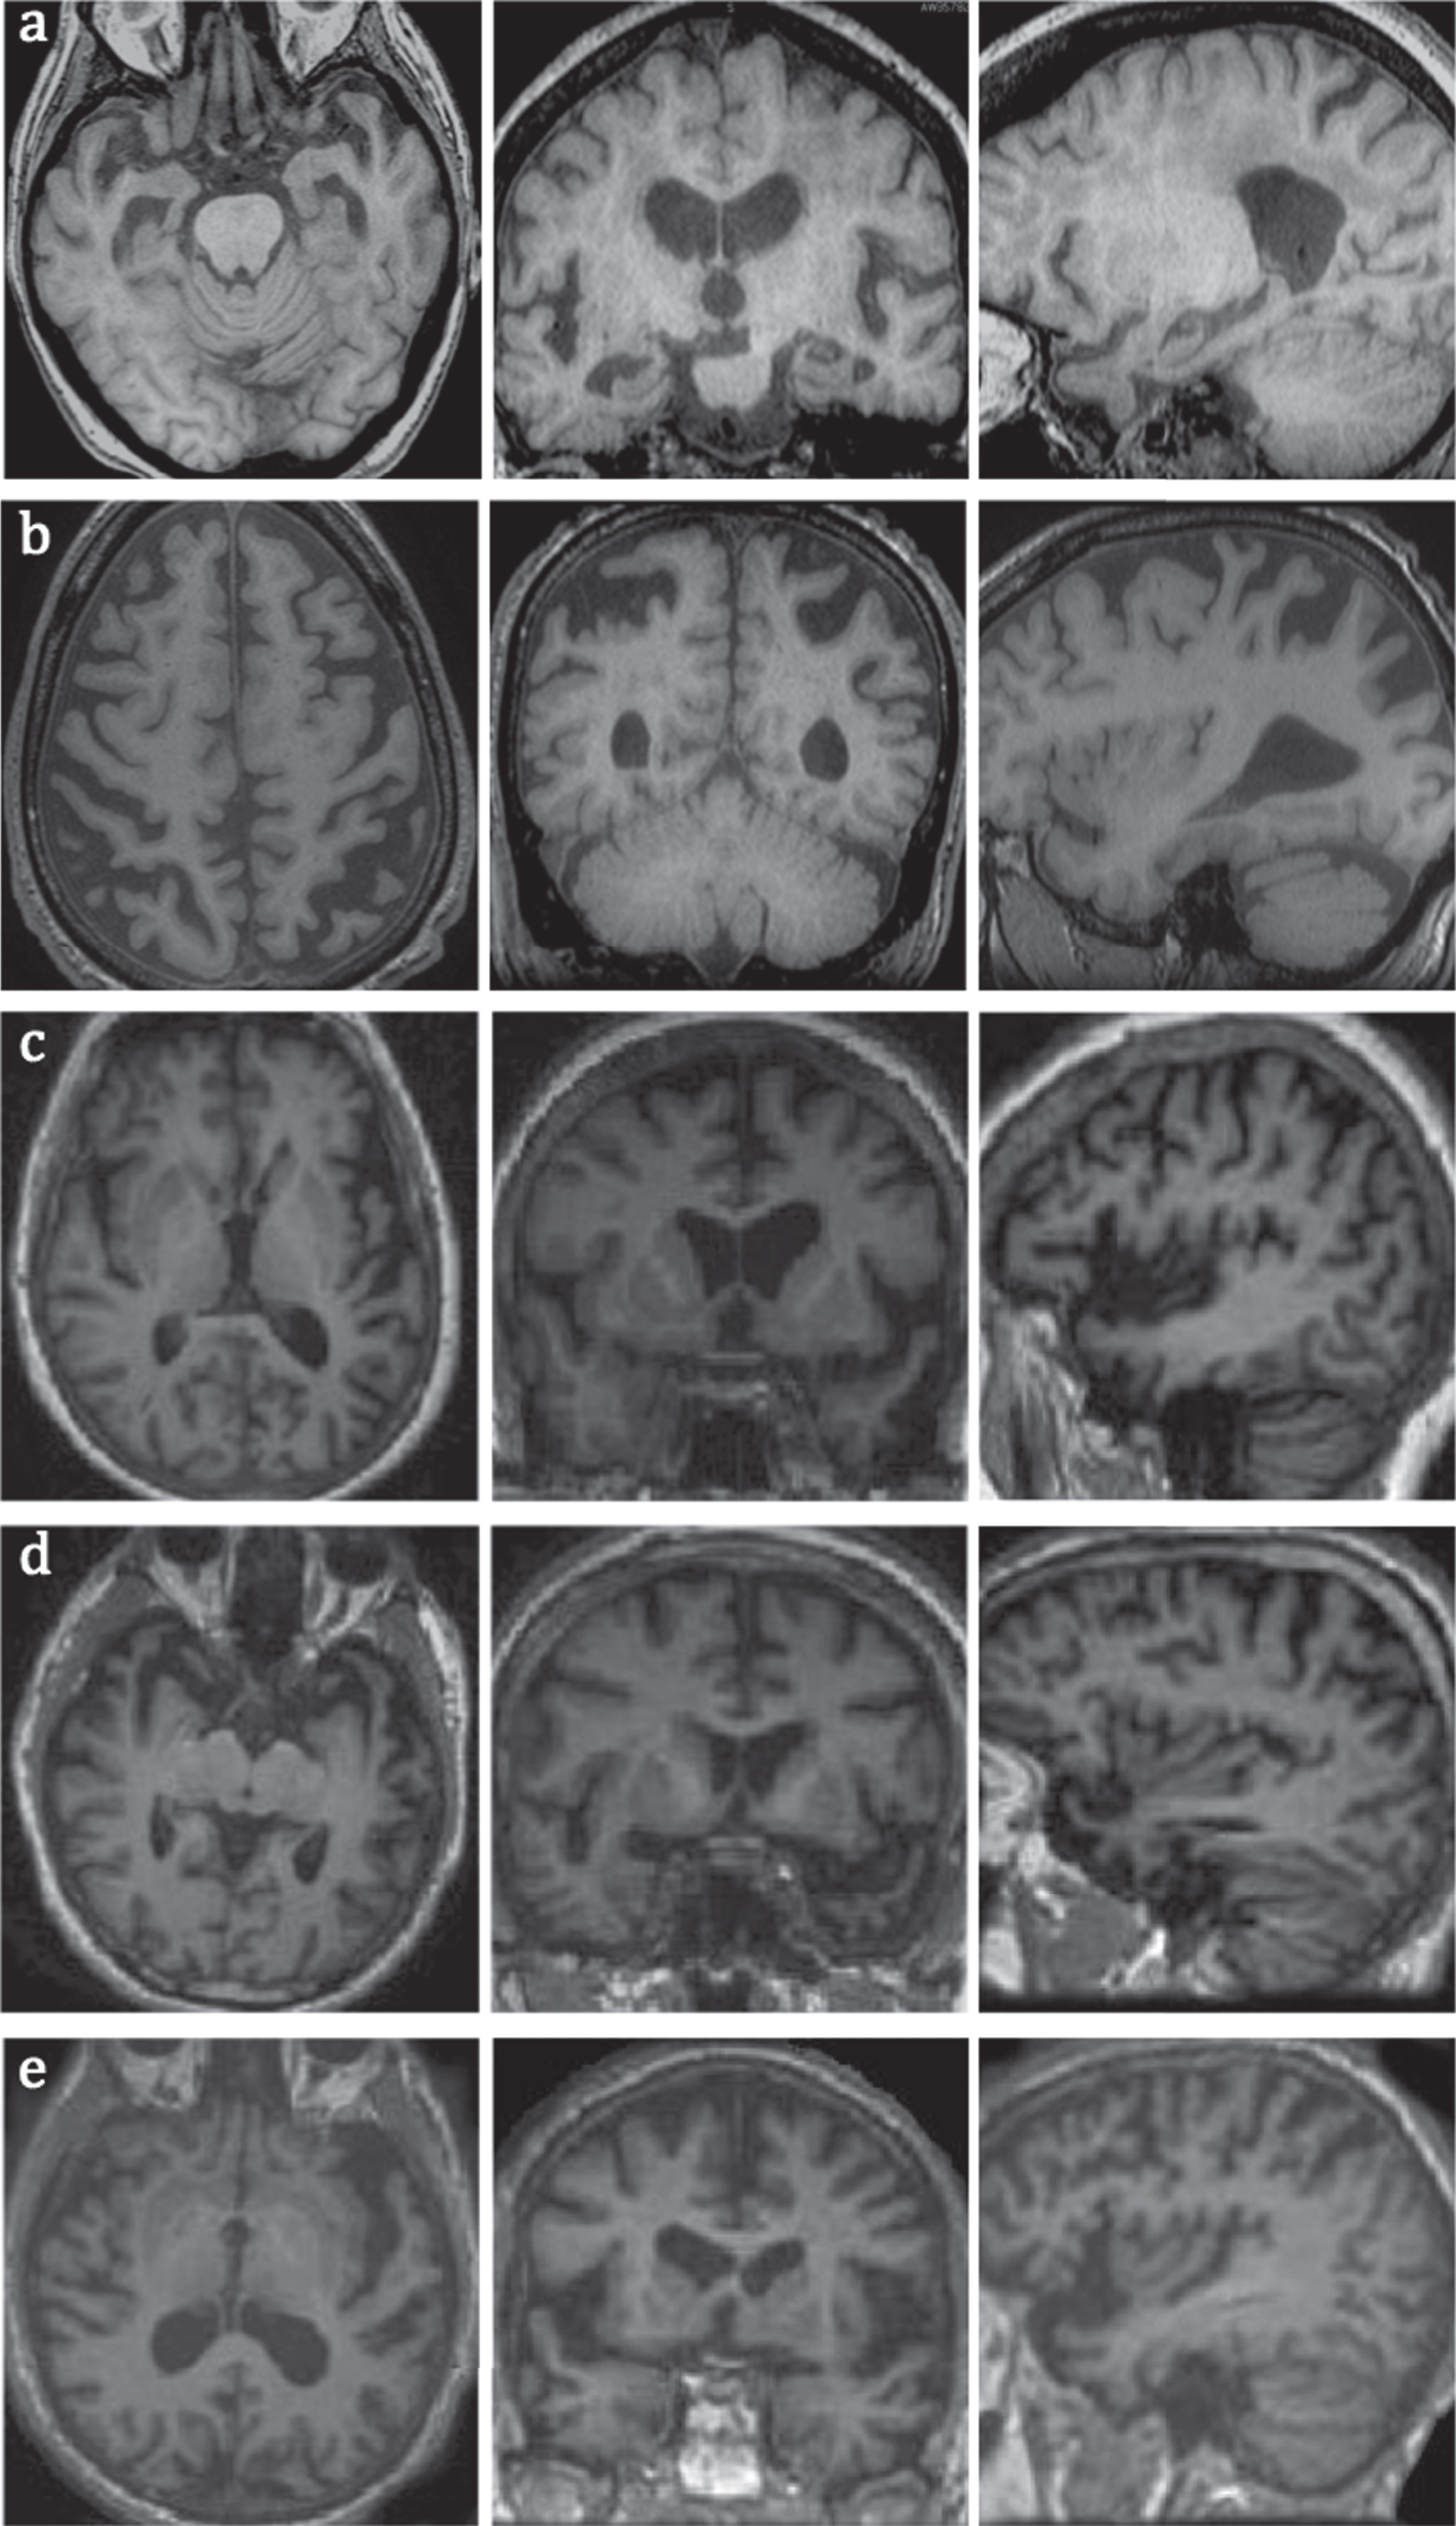 MRI images of common types of dementia in axial, coronal, and sagittal planes, a) early AD with hippocampal and MTL atrophy; b) PCA with superior posterior parietal lobes atrophy; c) logopenic variant of PPA with atrophy in left temporoparietal junction; note more prominent left sided atrophy of posterior and lateral temporal lobes; d) semantic variant of PPA with atrophy in anterior and lateral temporal lobes; e) non-fluent variant of PPA with left frontal operculum and insular atrophy.